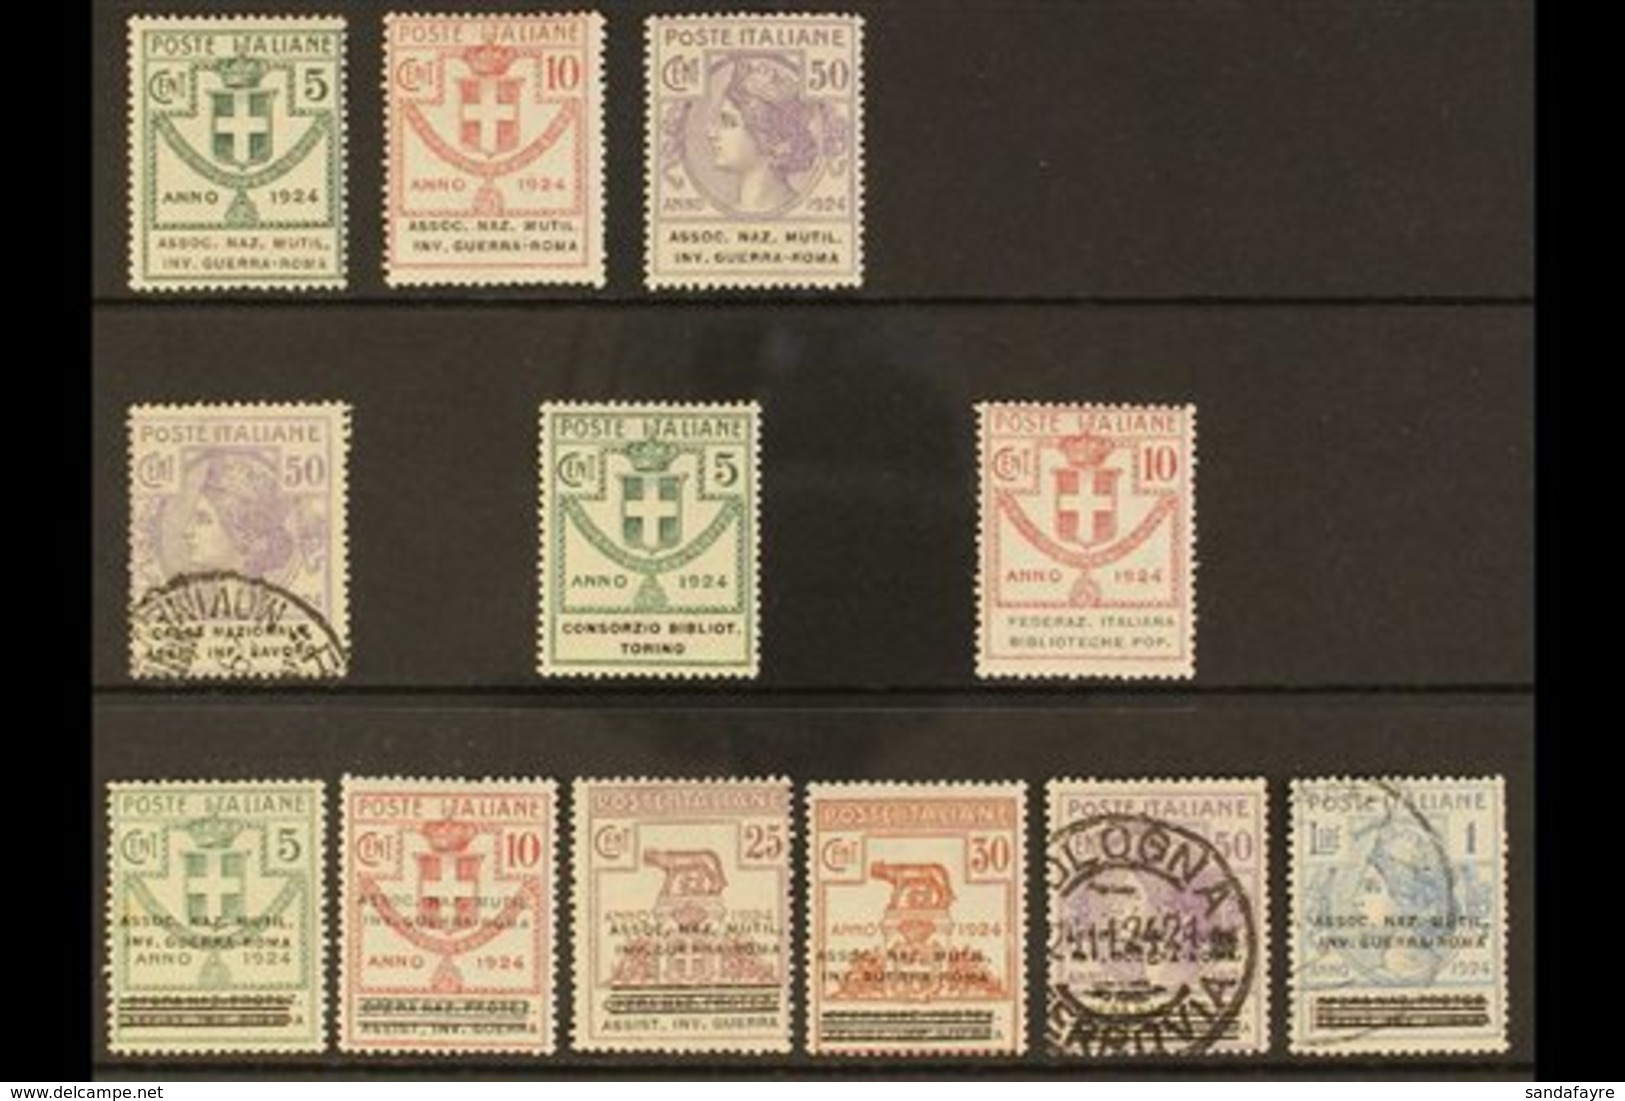 FRANCHISE STAMPS 1924 Mint & Used All Different Group On A Stock Card, Includes Assoc. Naz. Mutil. Inv. Guerra - Roma, C - Sin Clasificación